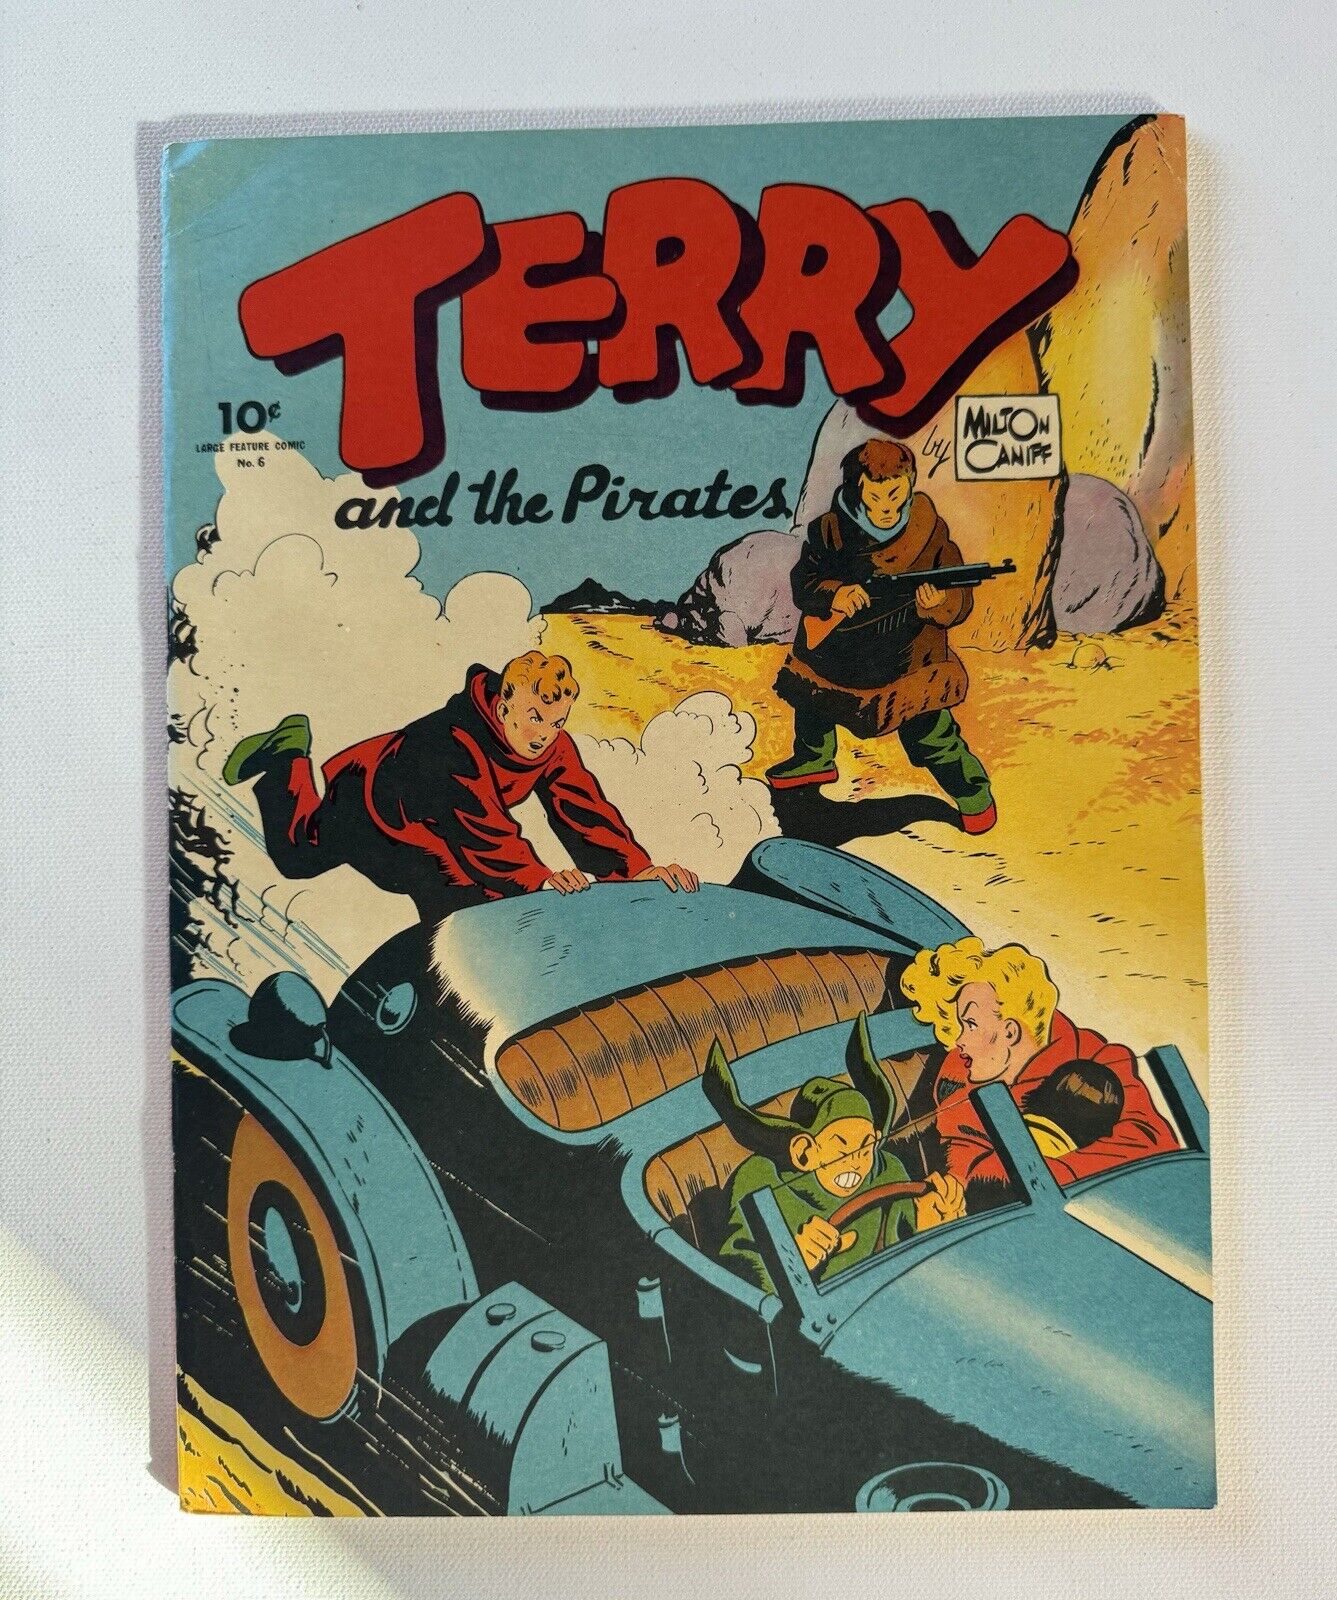 Terry and the Pirates #6 by Milton Caniff - Chicago Tribune lim ed. reprint 1983